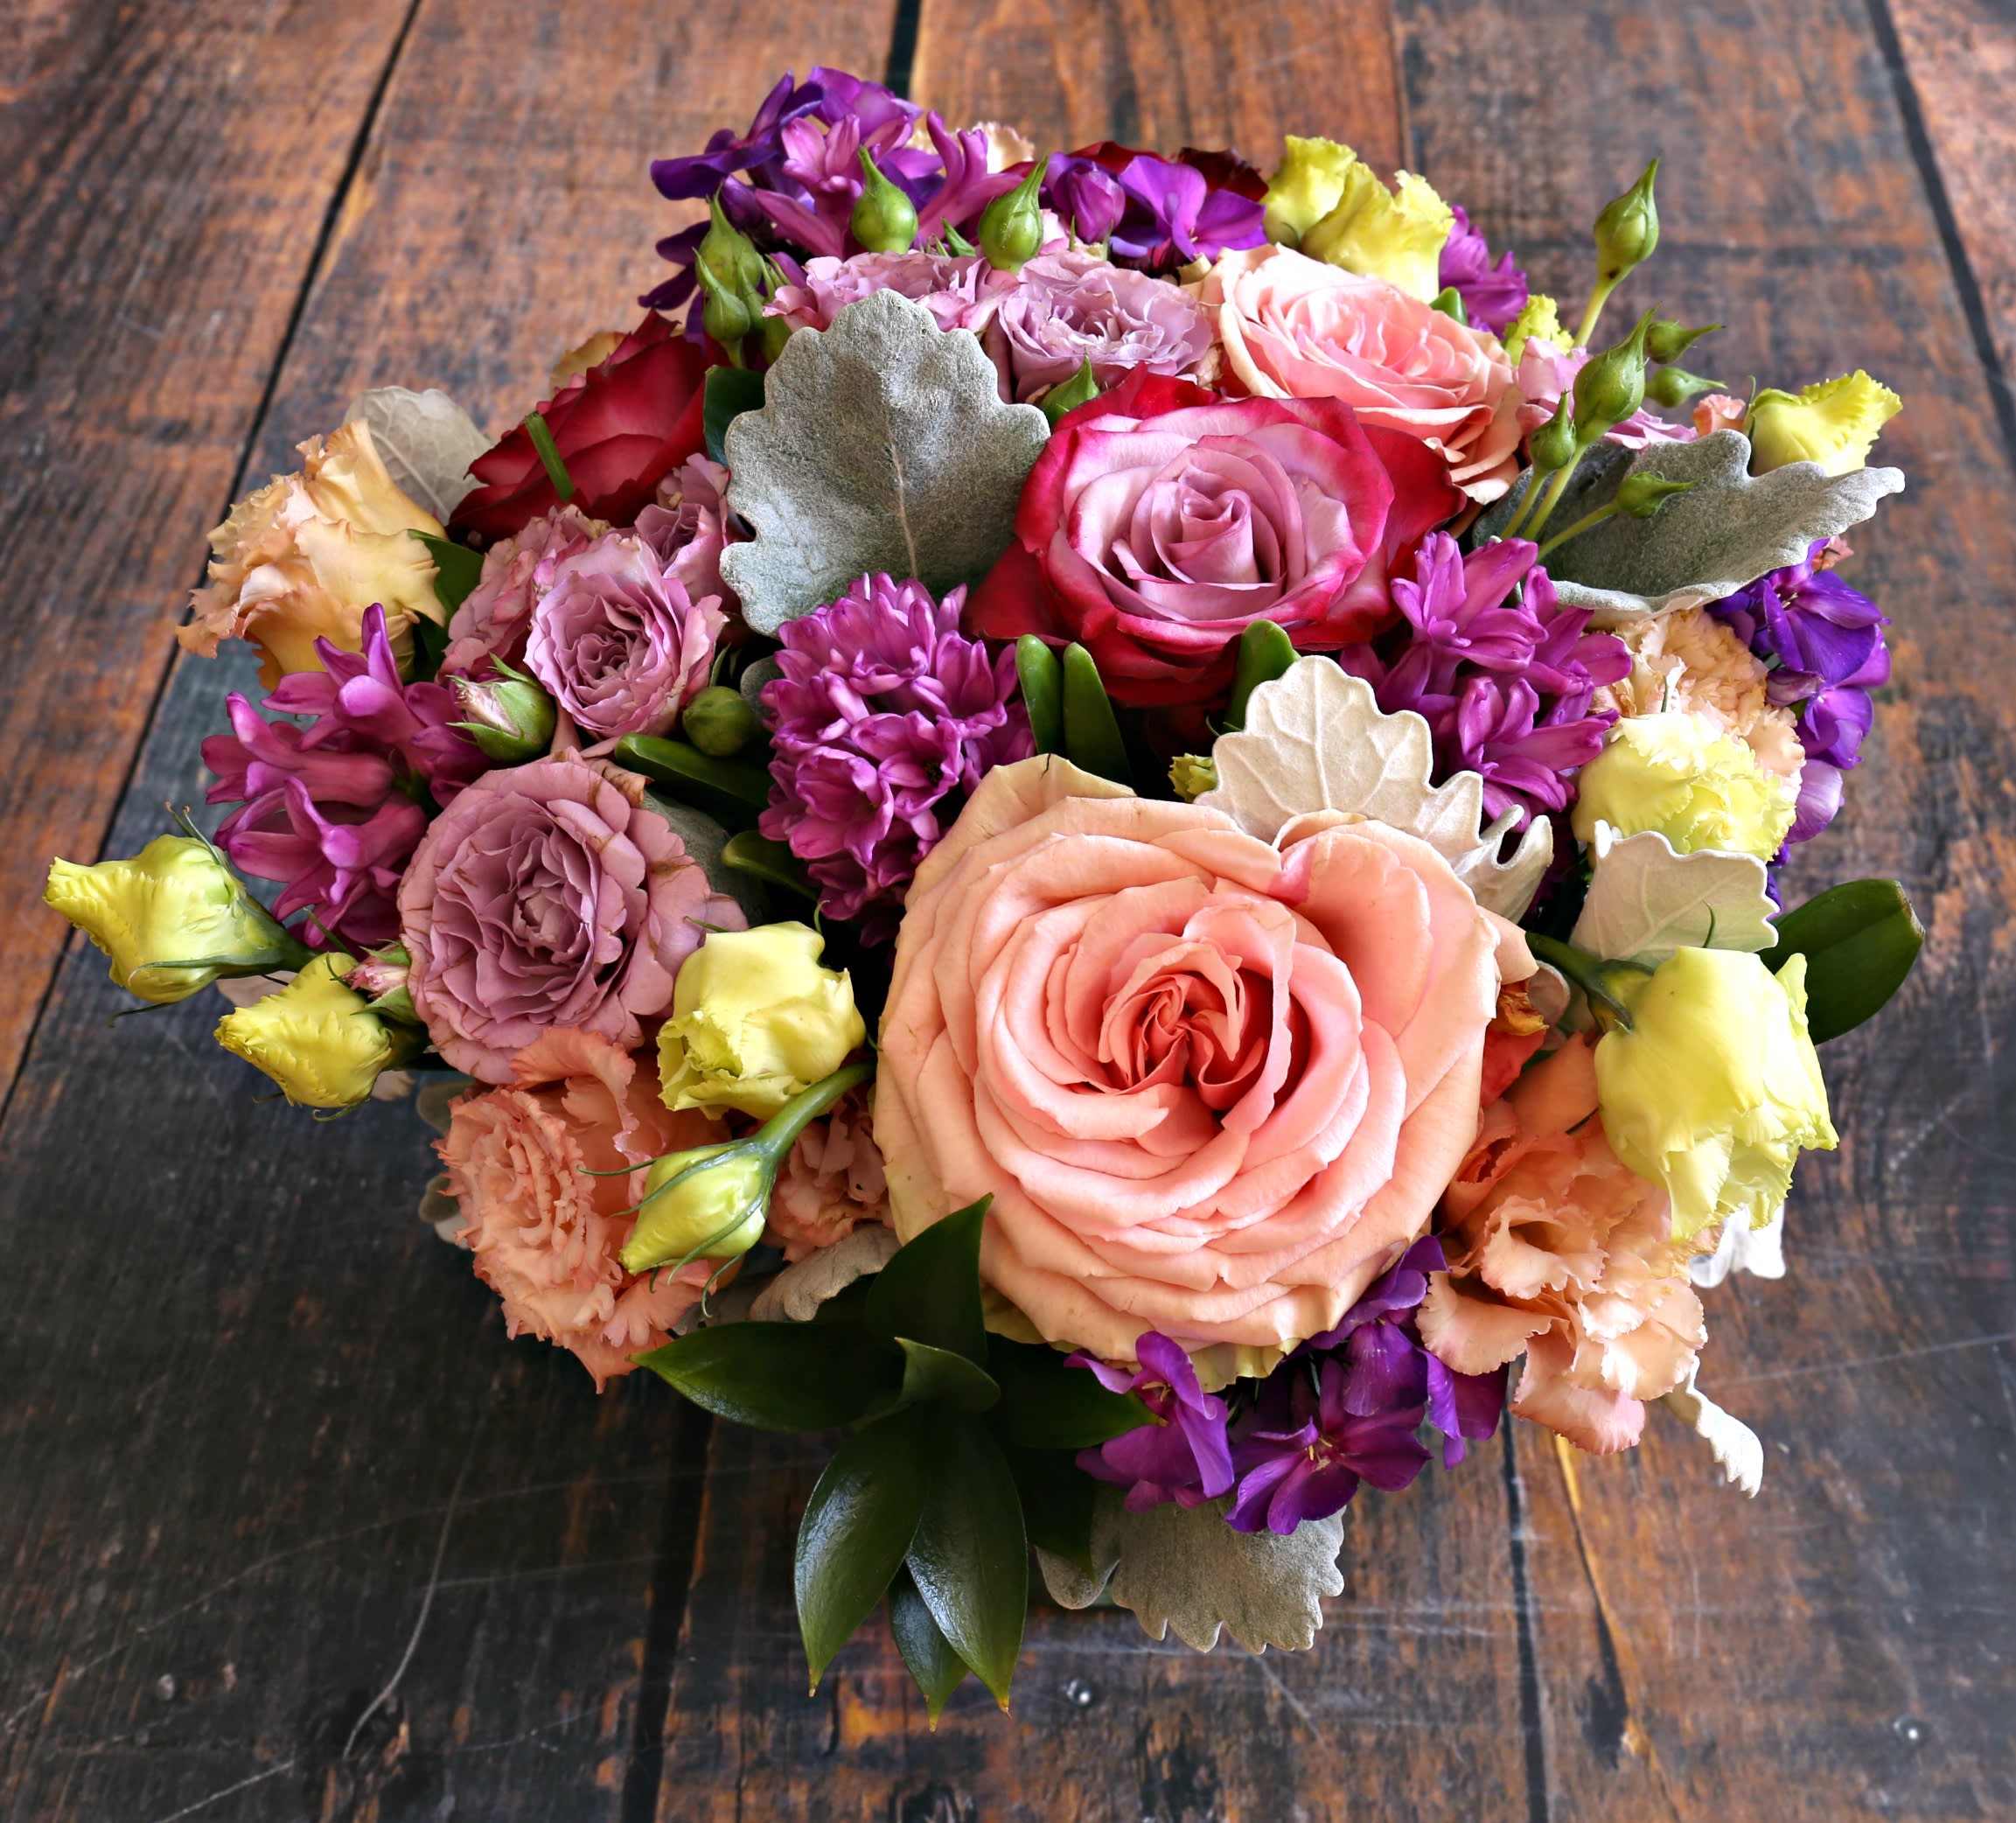 Lush - A beautiful, full, lush floral arrangement perfect for all occasions! Especially Mother's Day and birthdays!